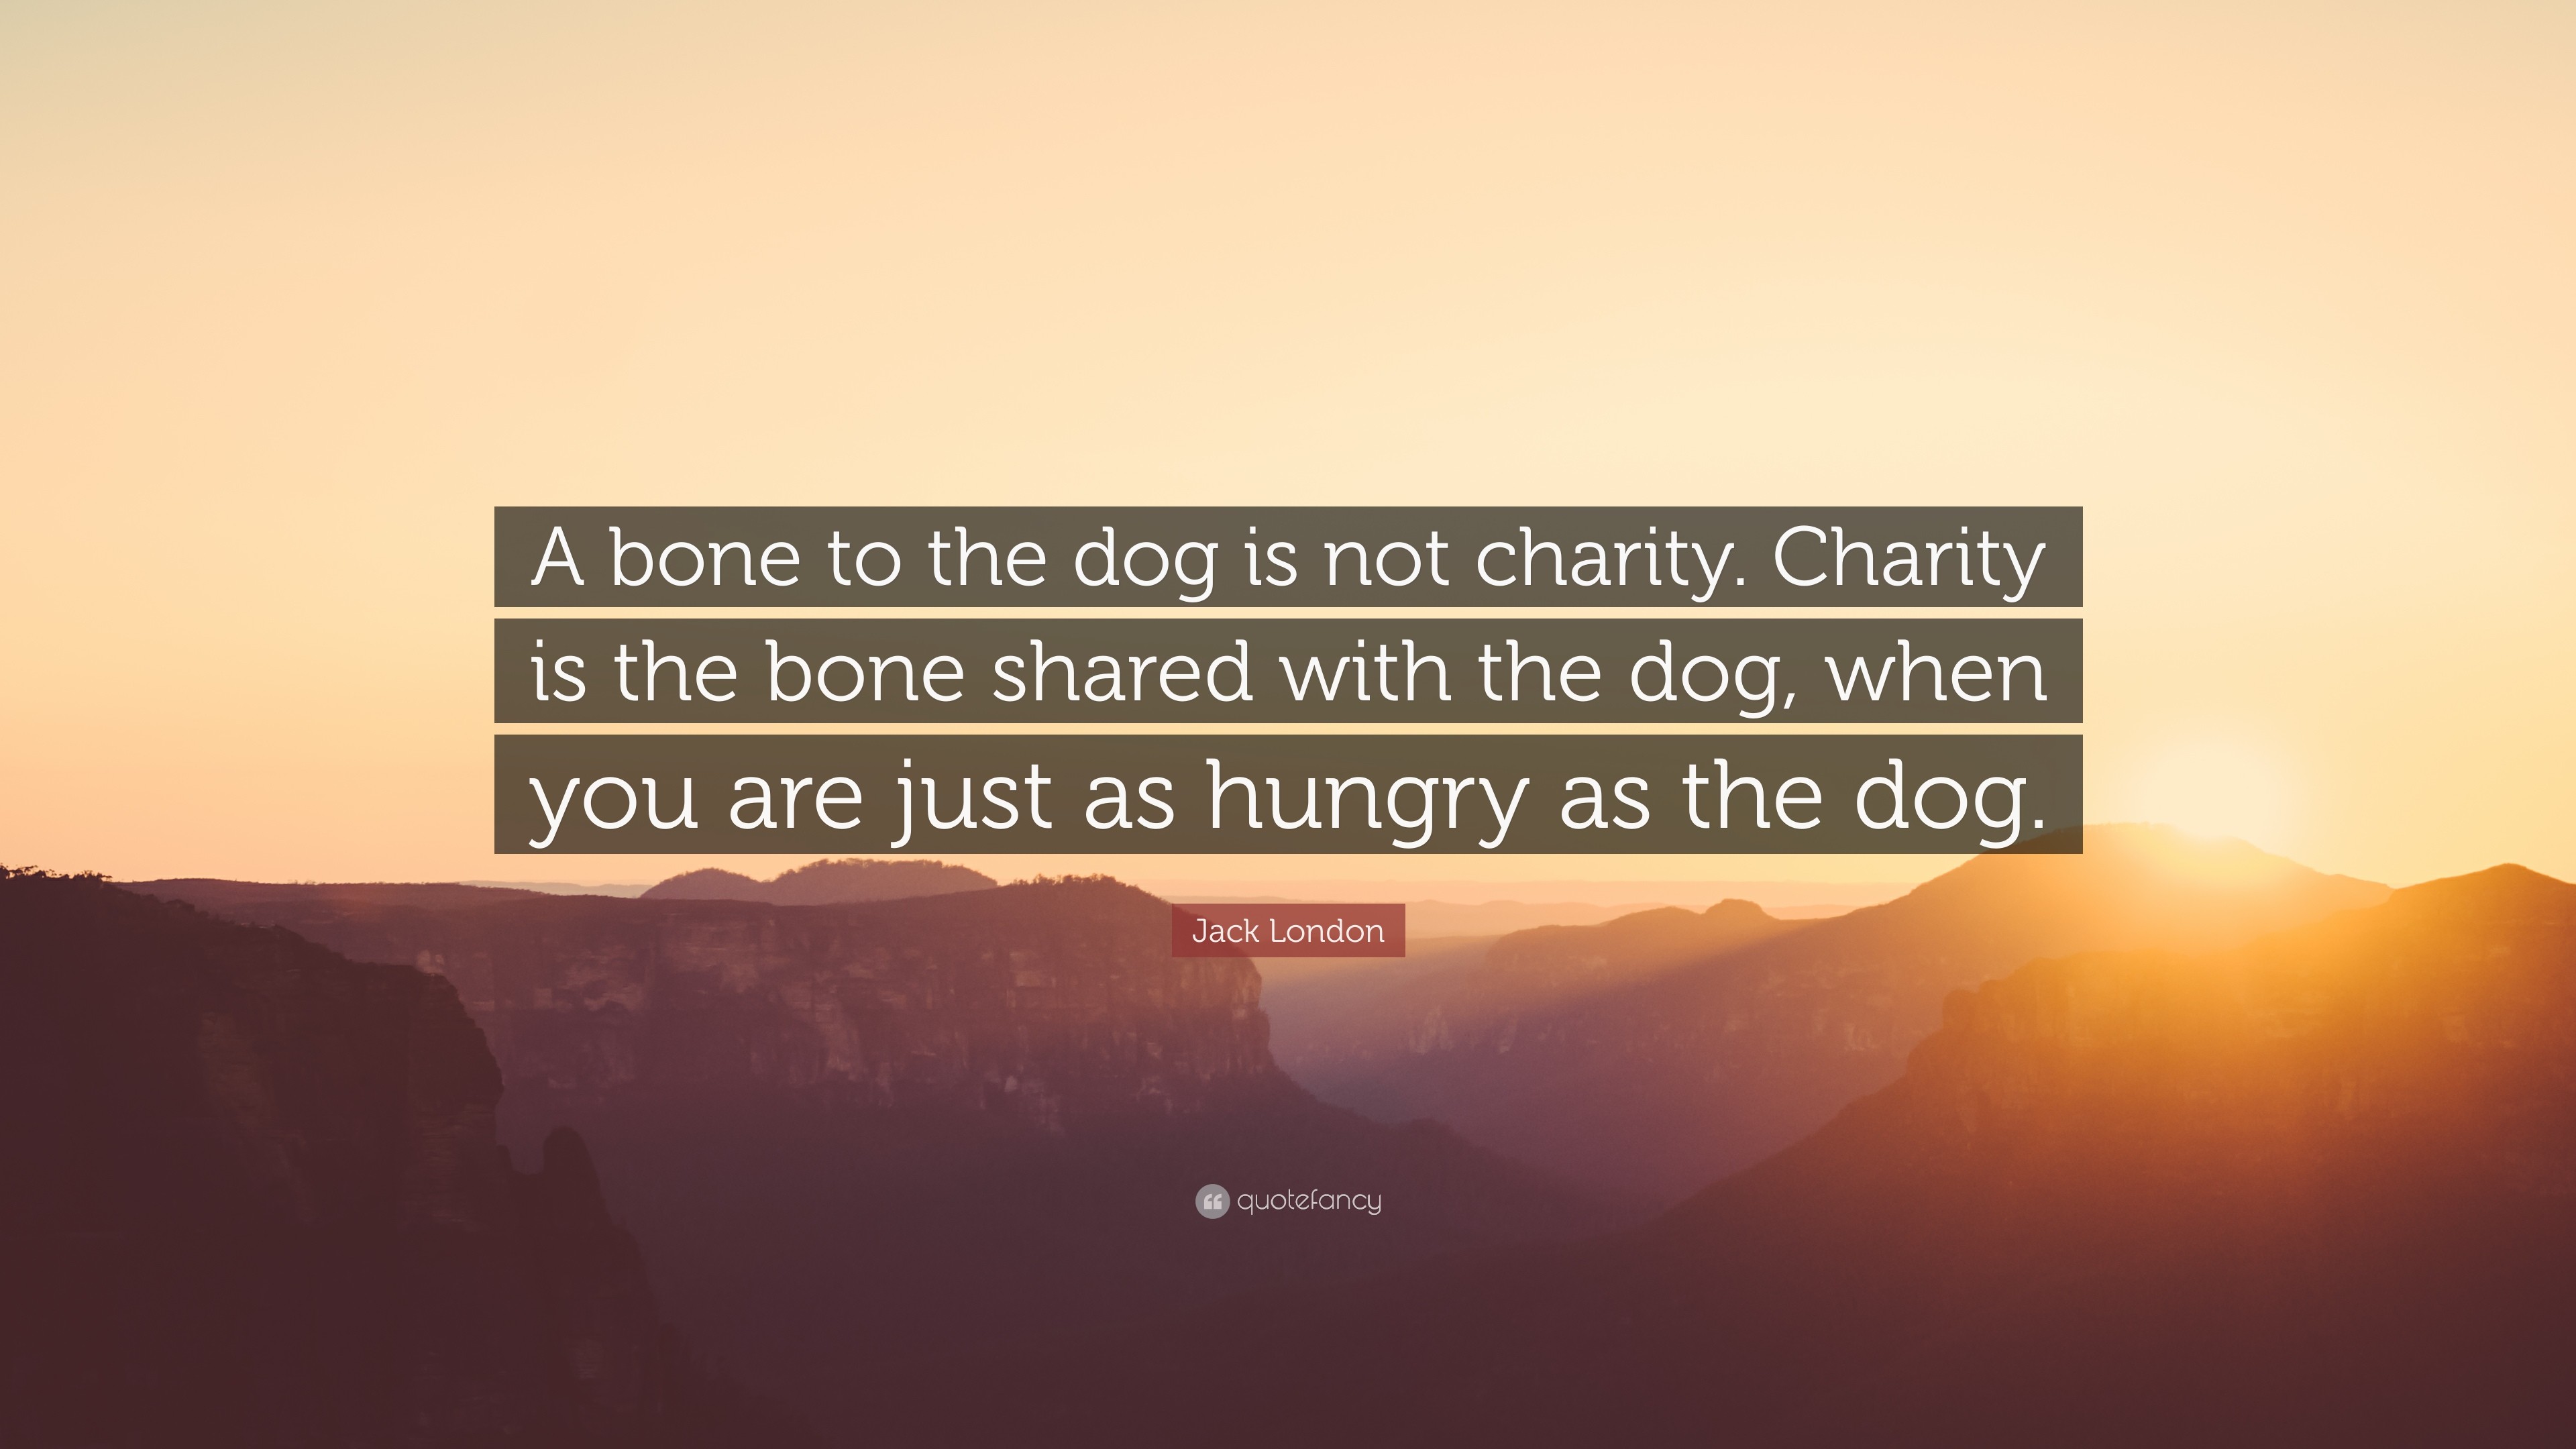 3840x2160 Jack London Quote: “A bone to the dog is not charity. Charity is